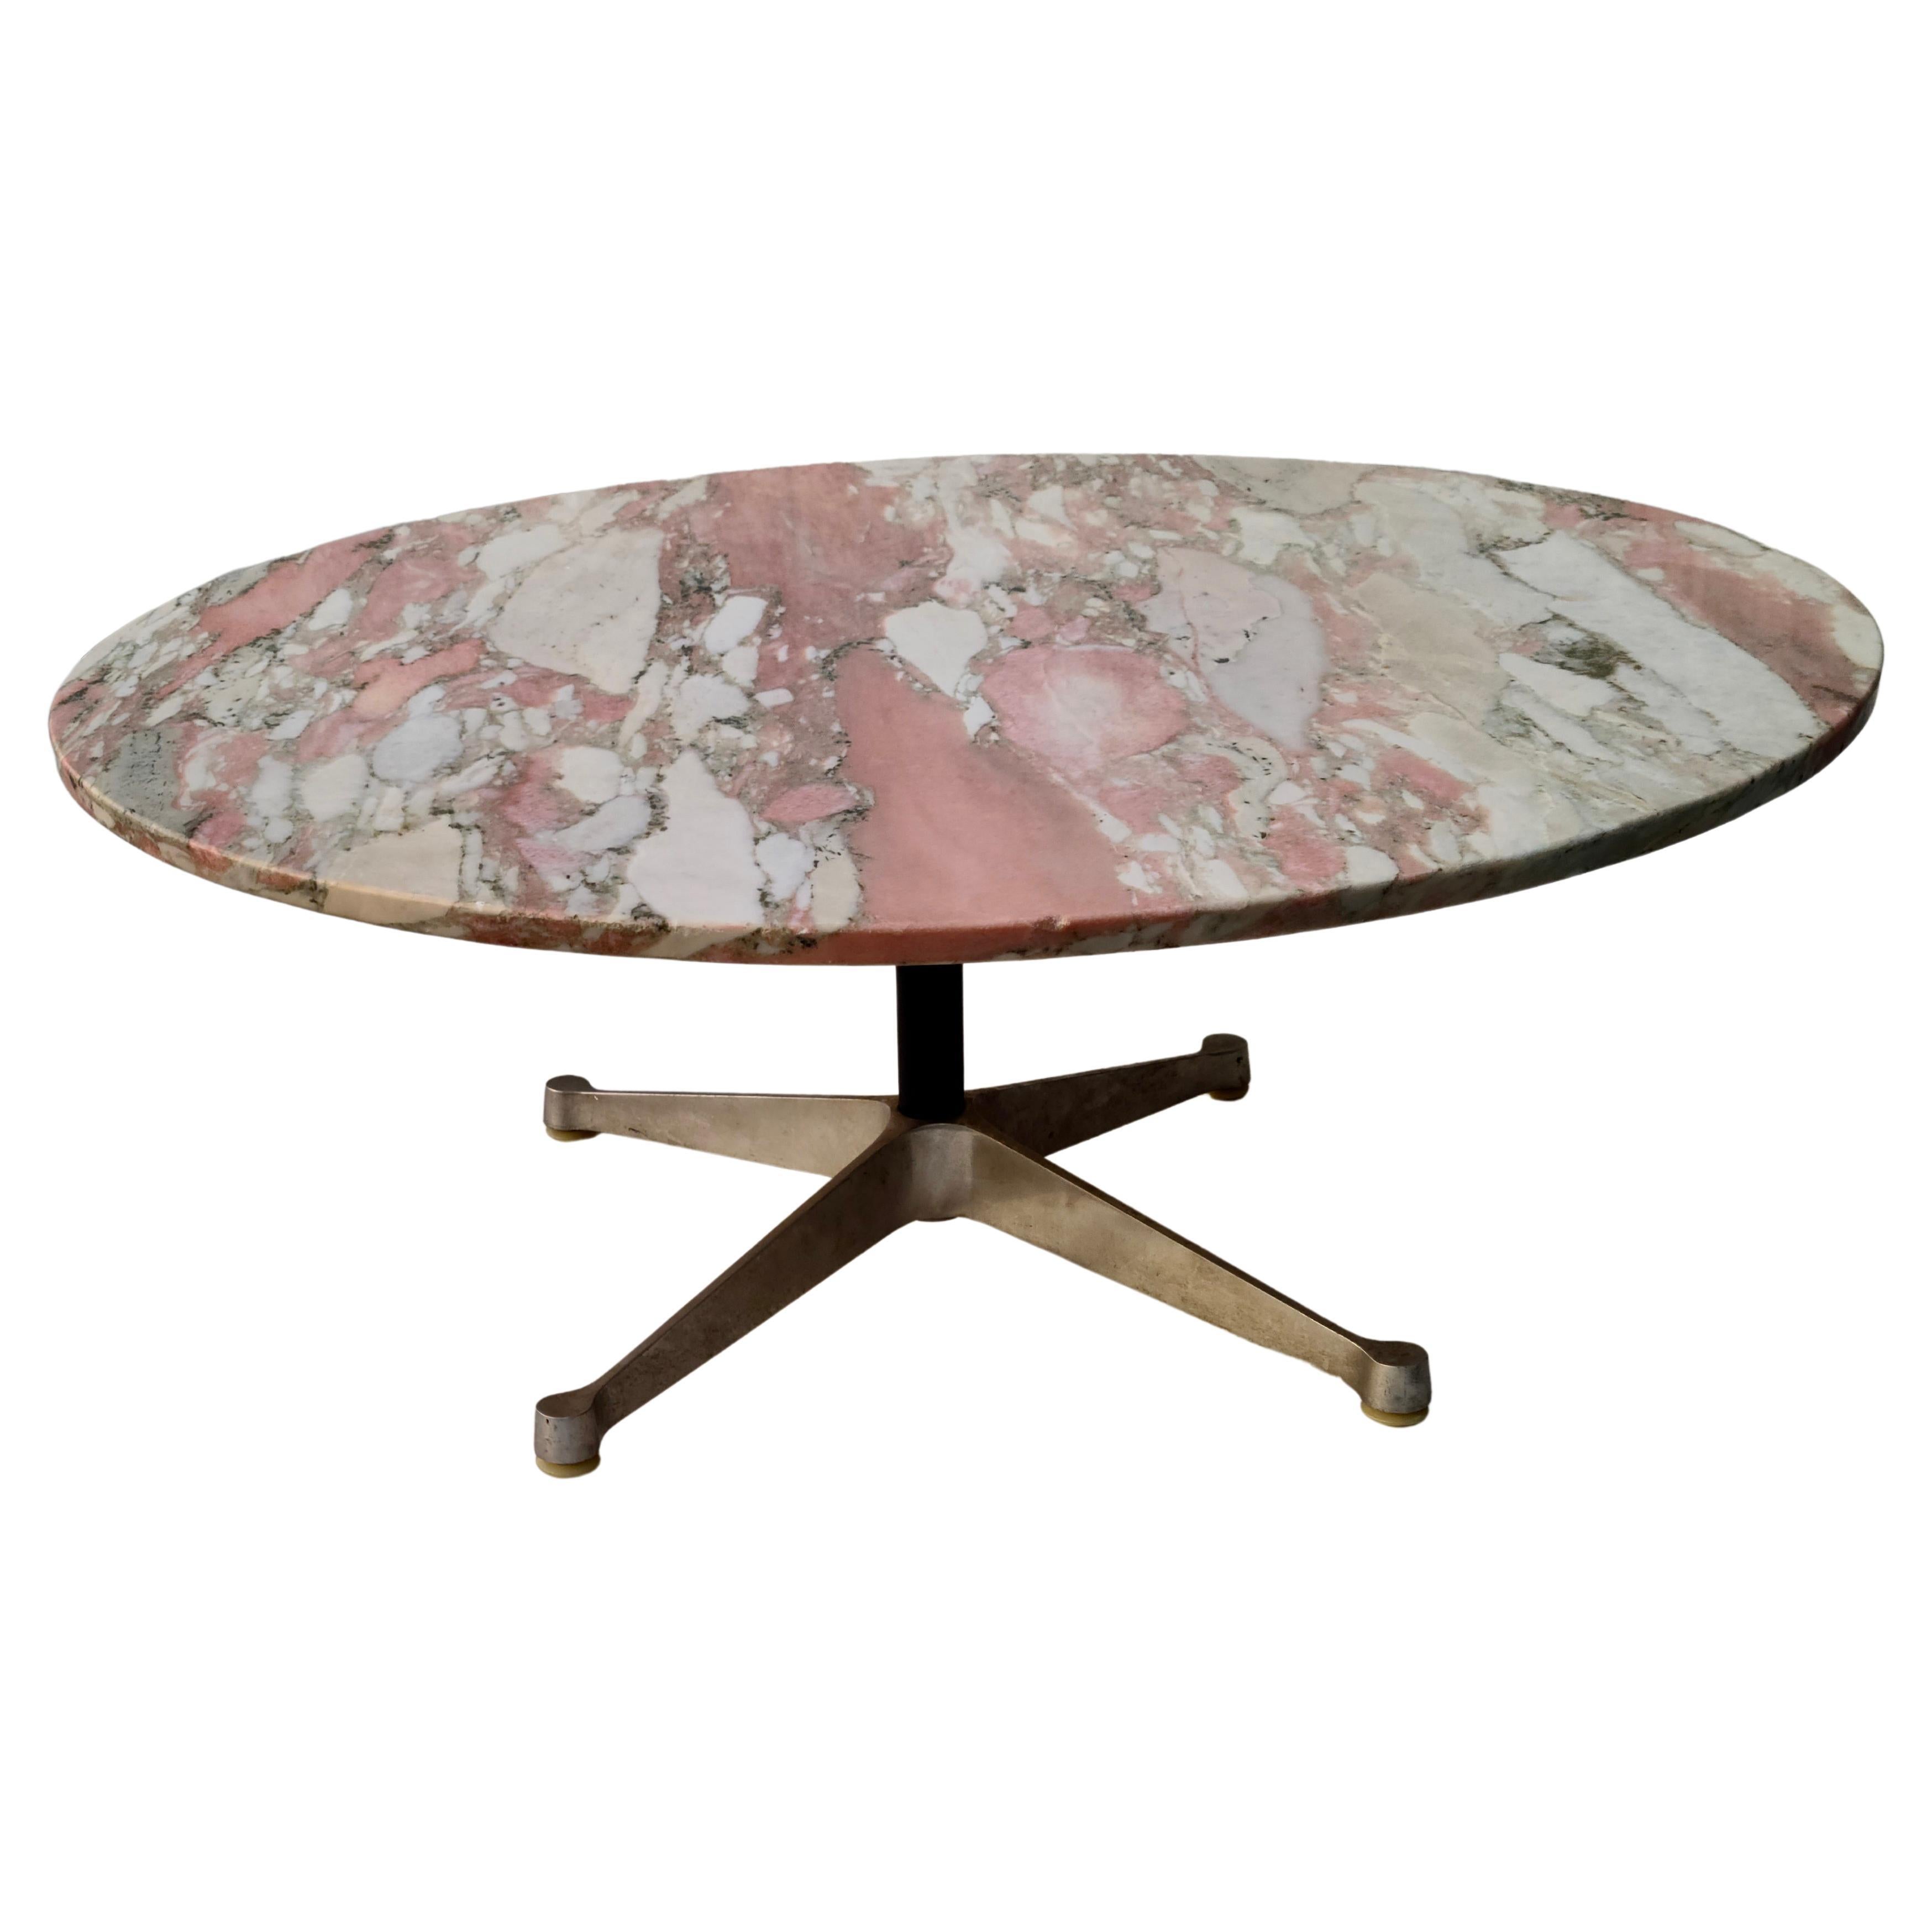 Eames Aluminum Group Coffee Table.
Pink Marble Top.

